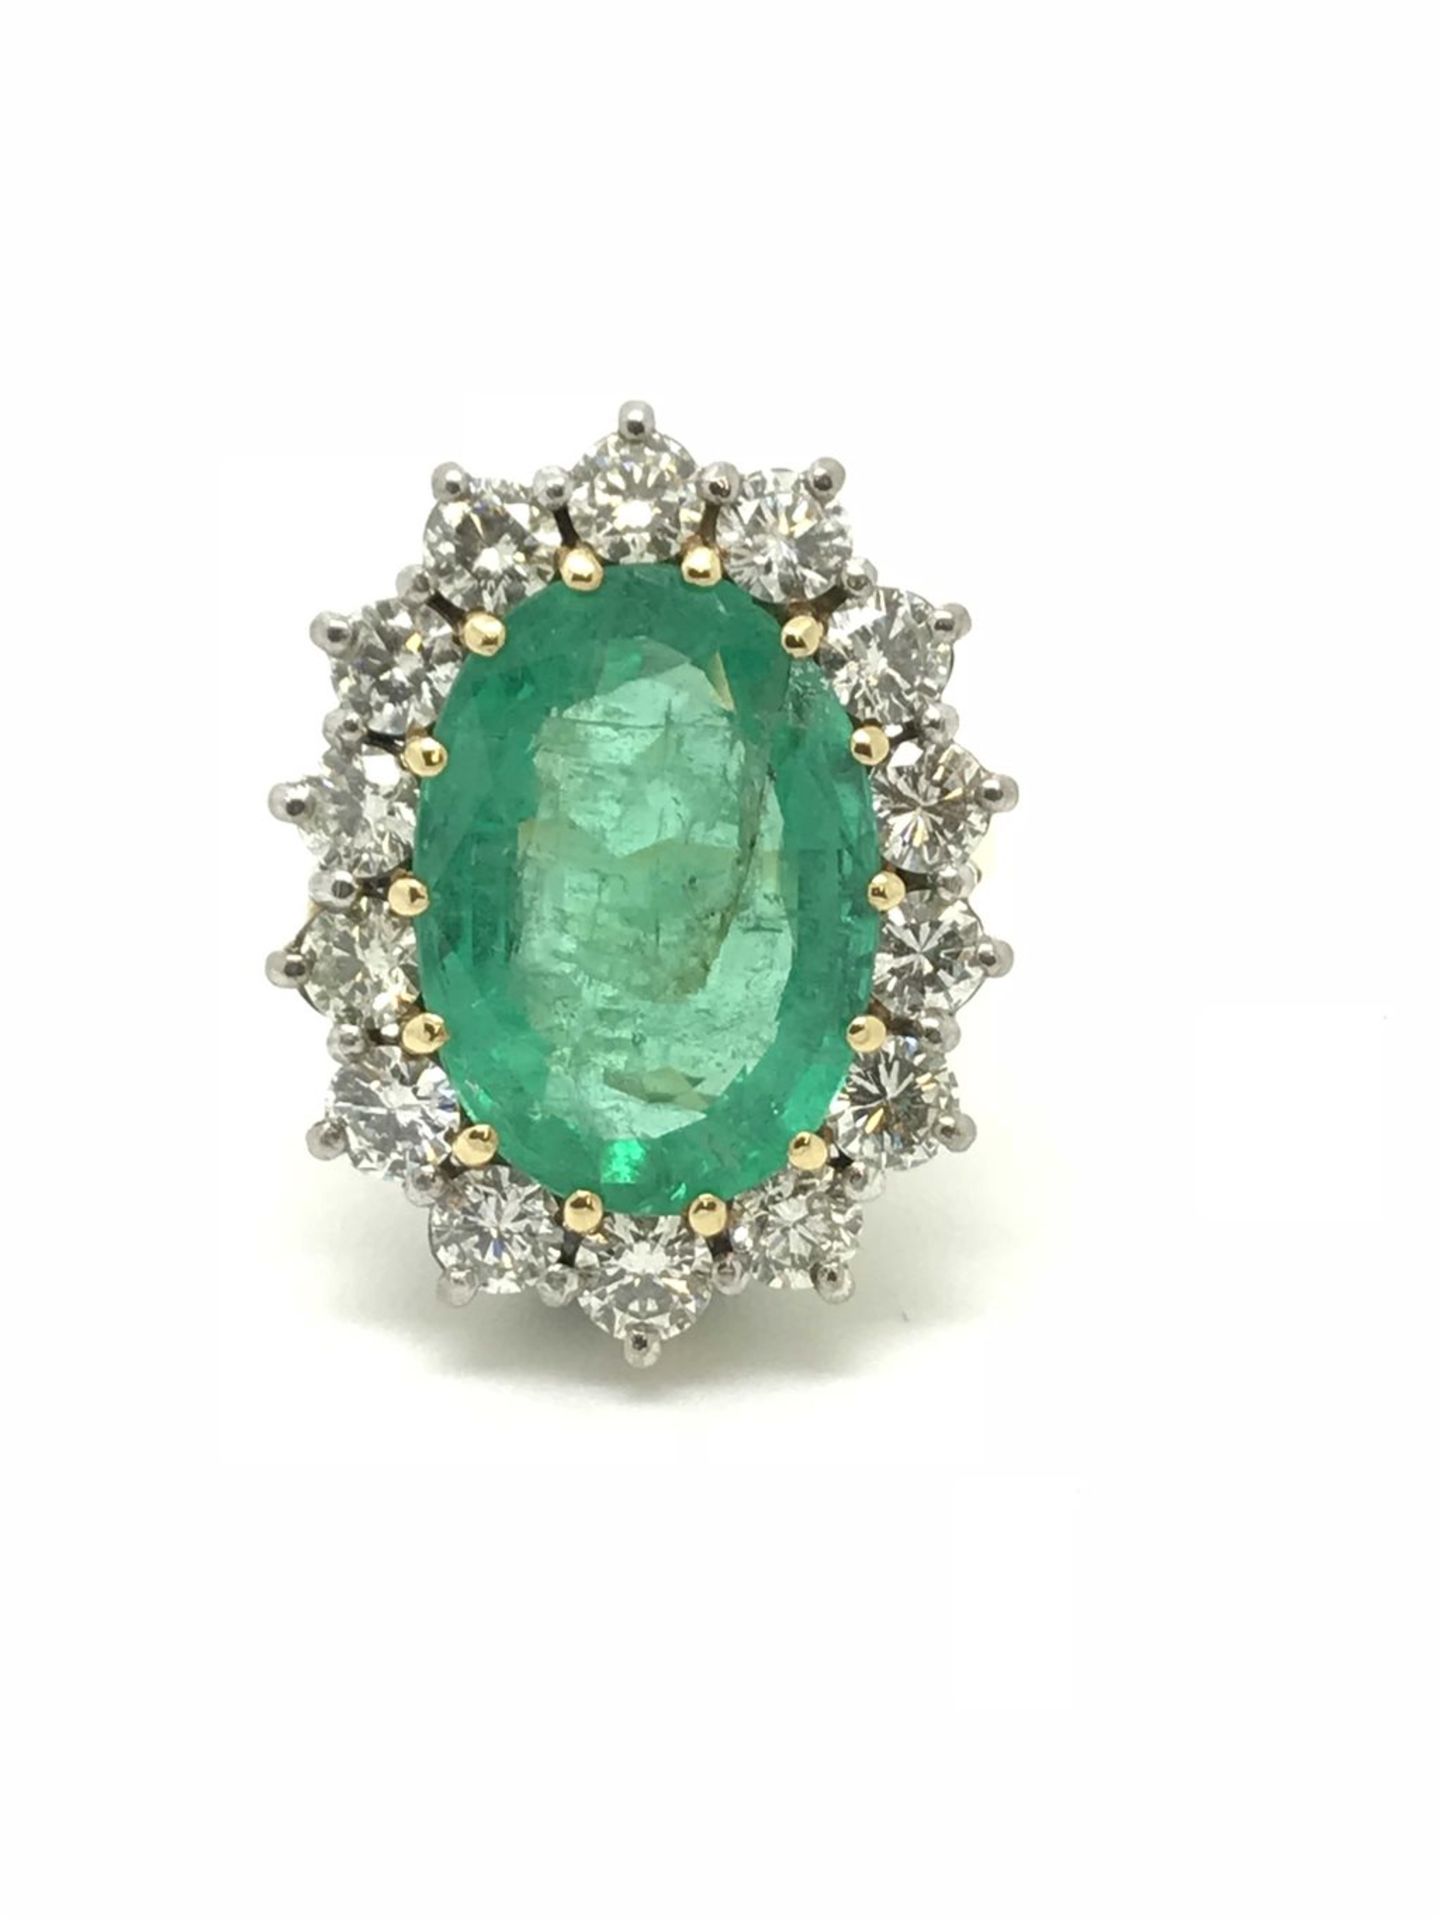 Emerald (6.93ct) & Diamond (2.10ct) Large Cluster Ring - 18ct Gold